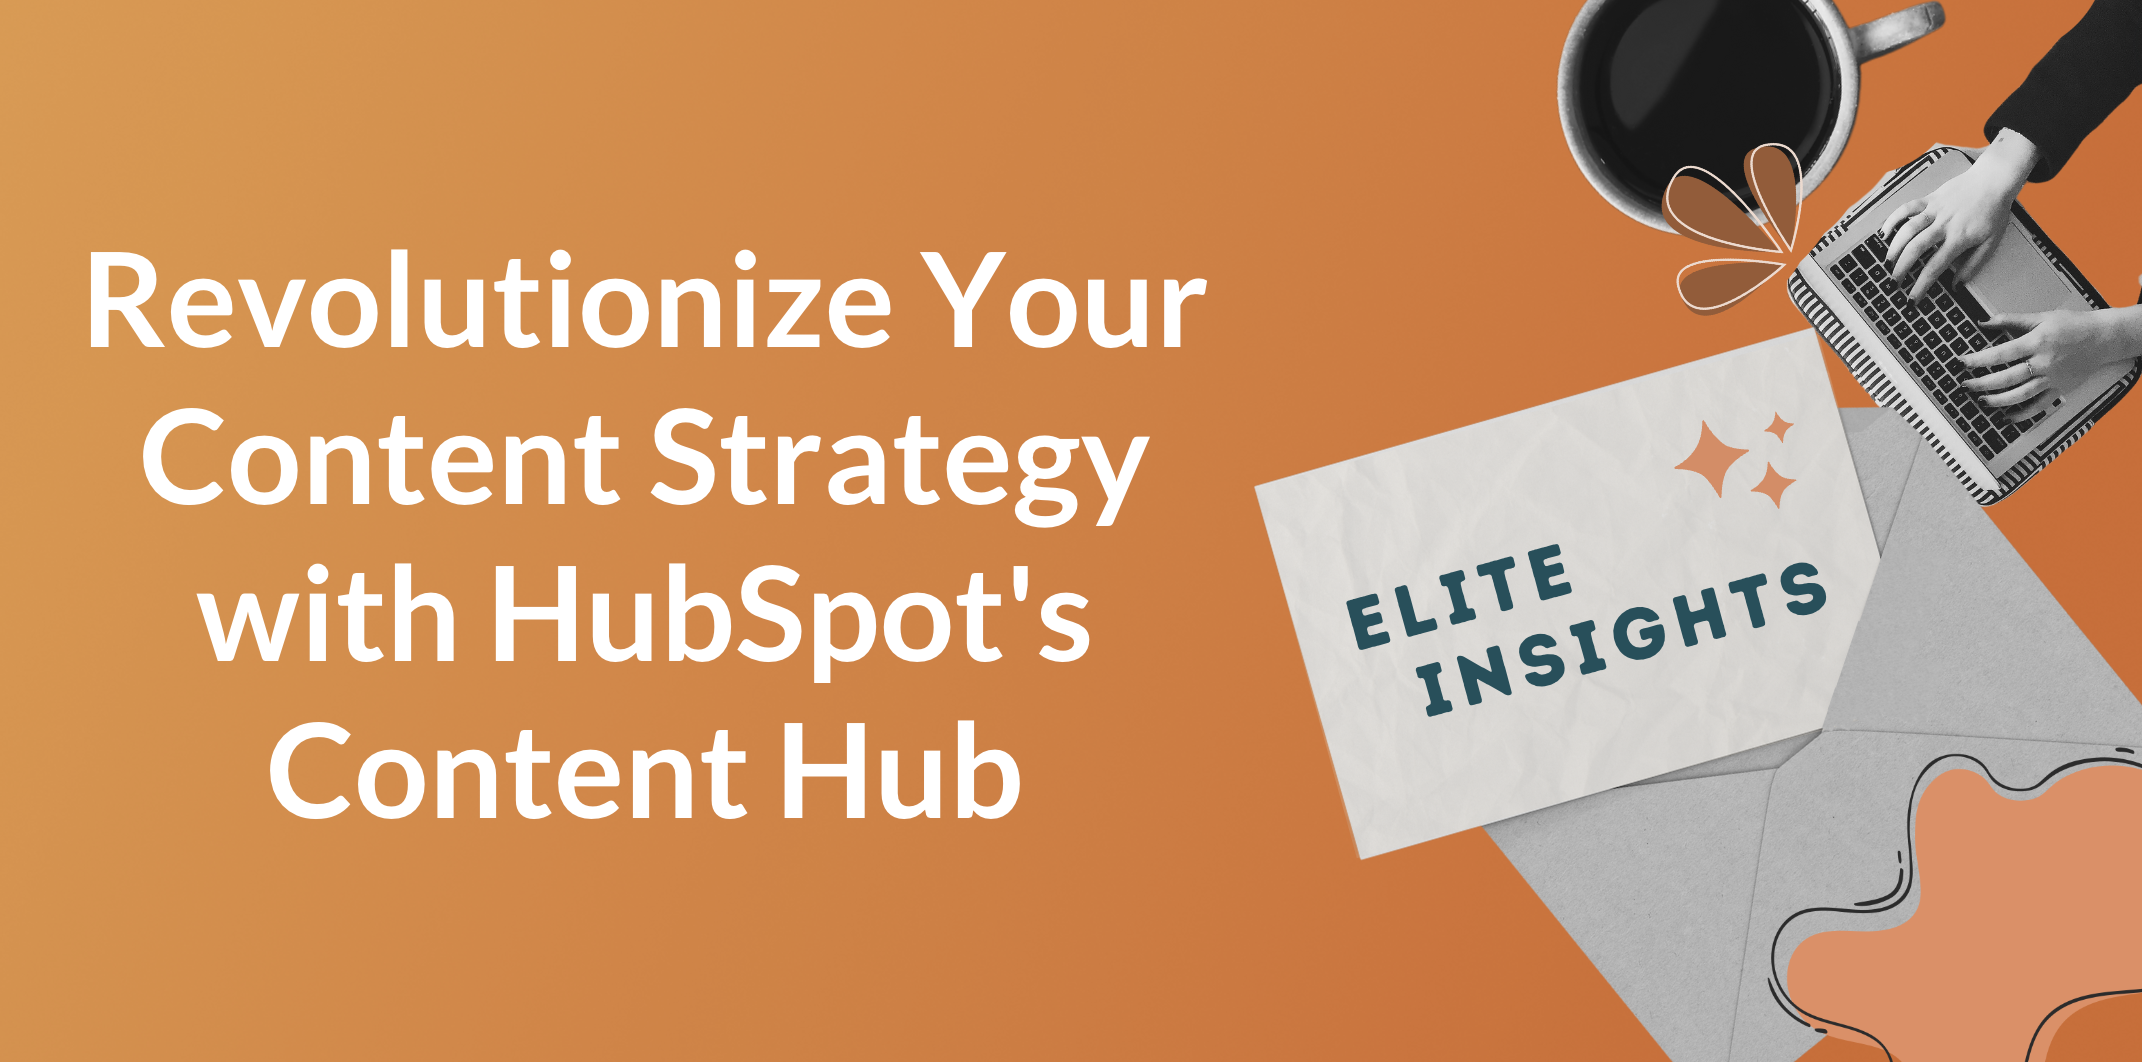 Revolutionize Your Content Strategy with HubSpot's Content Hub